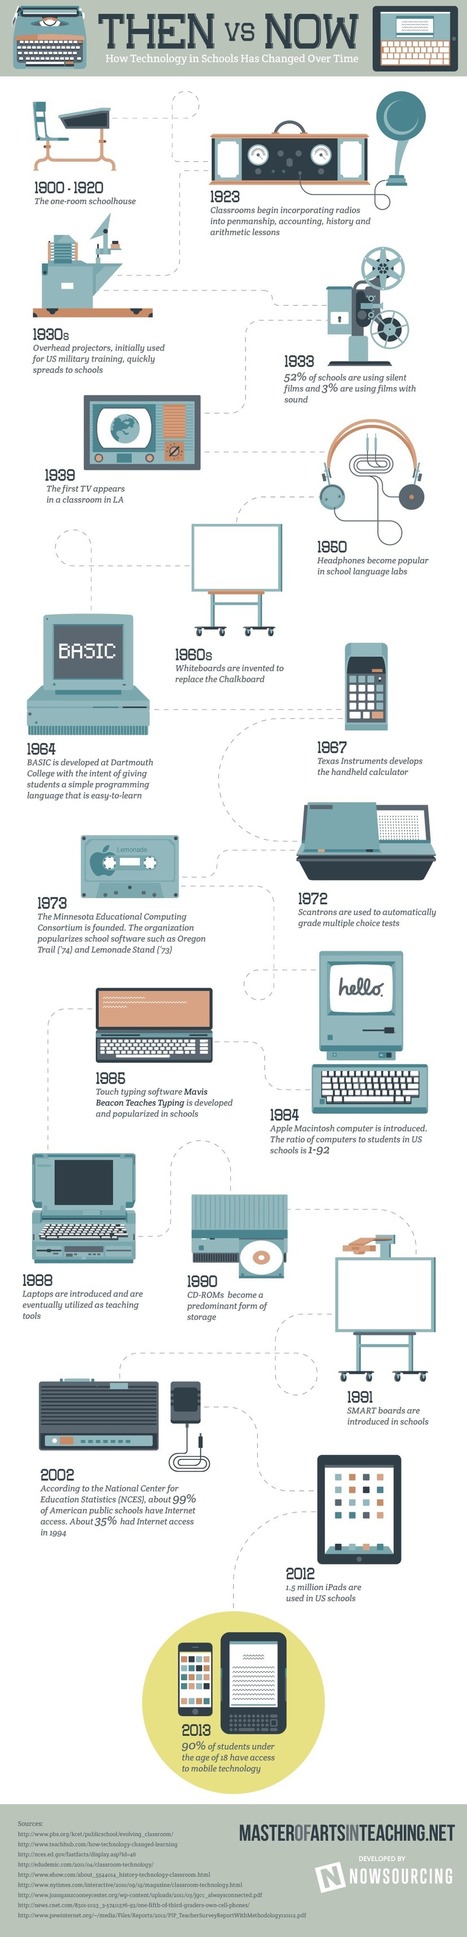 Awesome timeline chronicling the use of educational technology in schools | TIC & Educación | Scoop.it